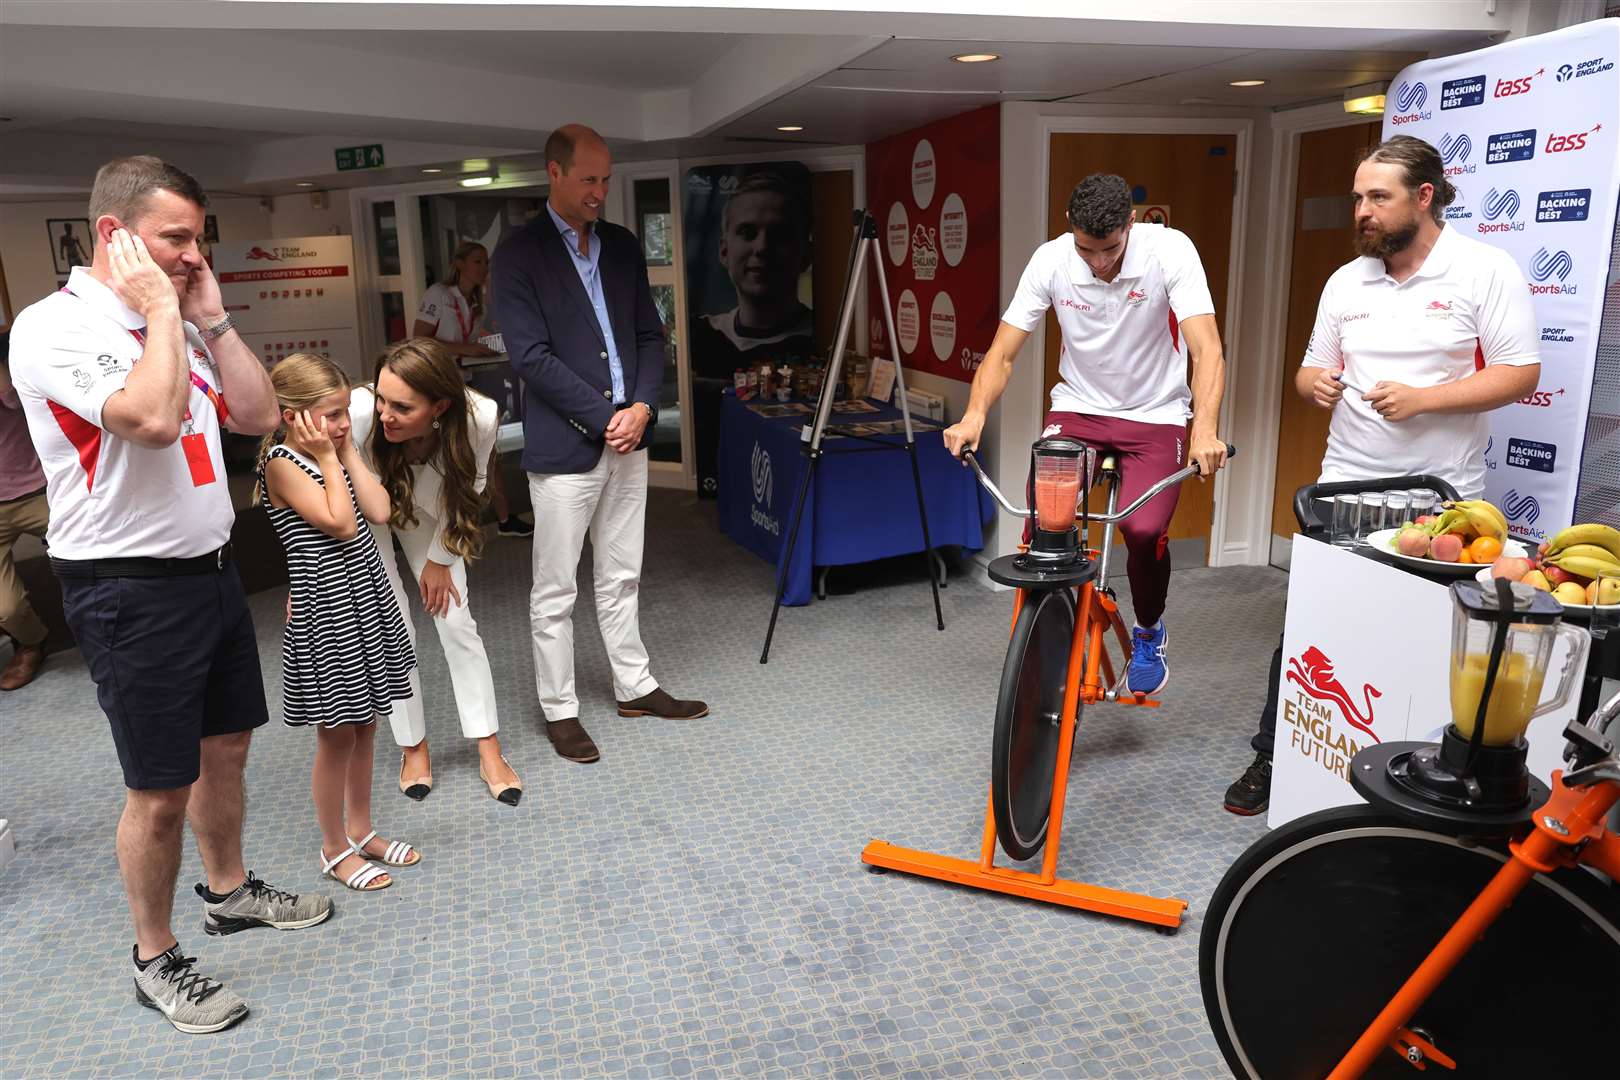 Tim Lawler and the Cambridges watch a demonstration of a bicycle-powered smoothie maker (Chris Jackson/PA)